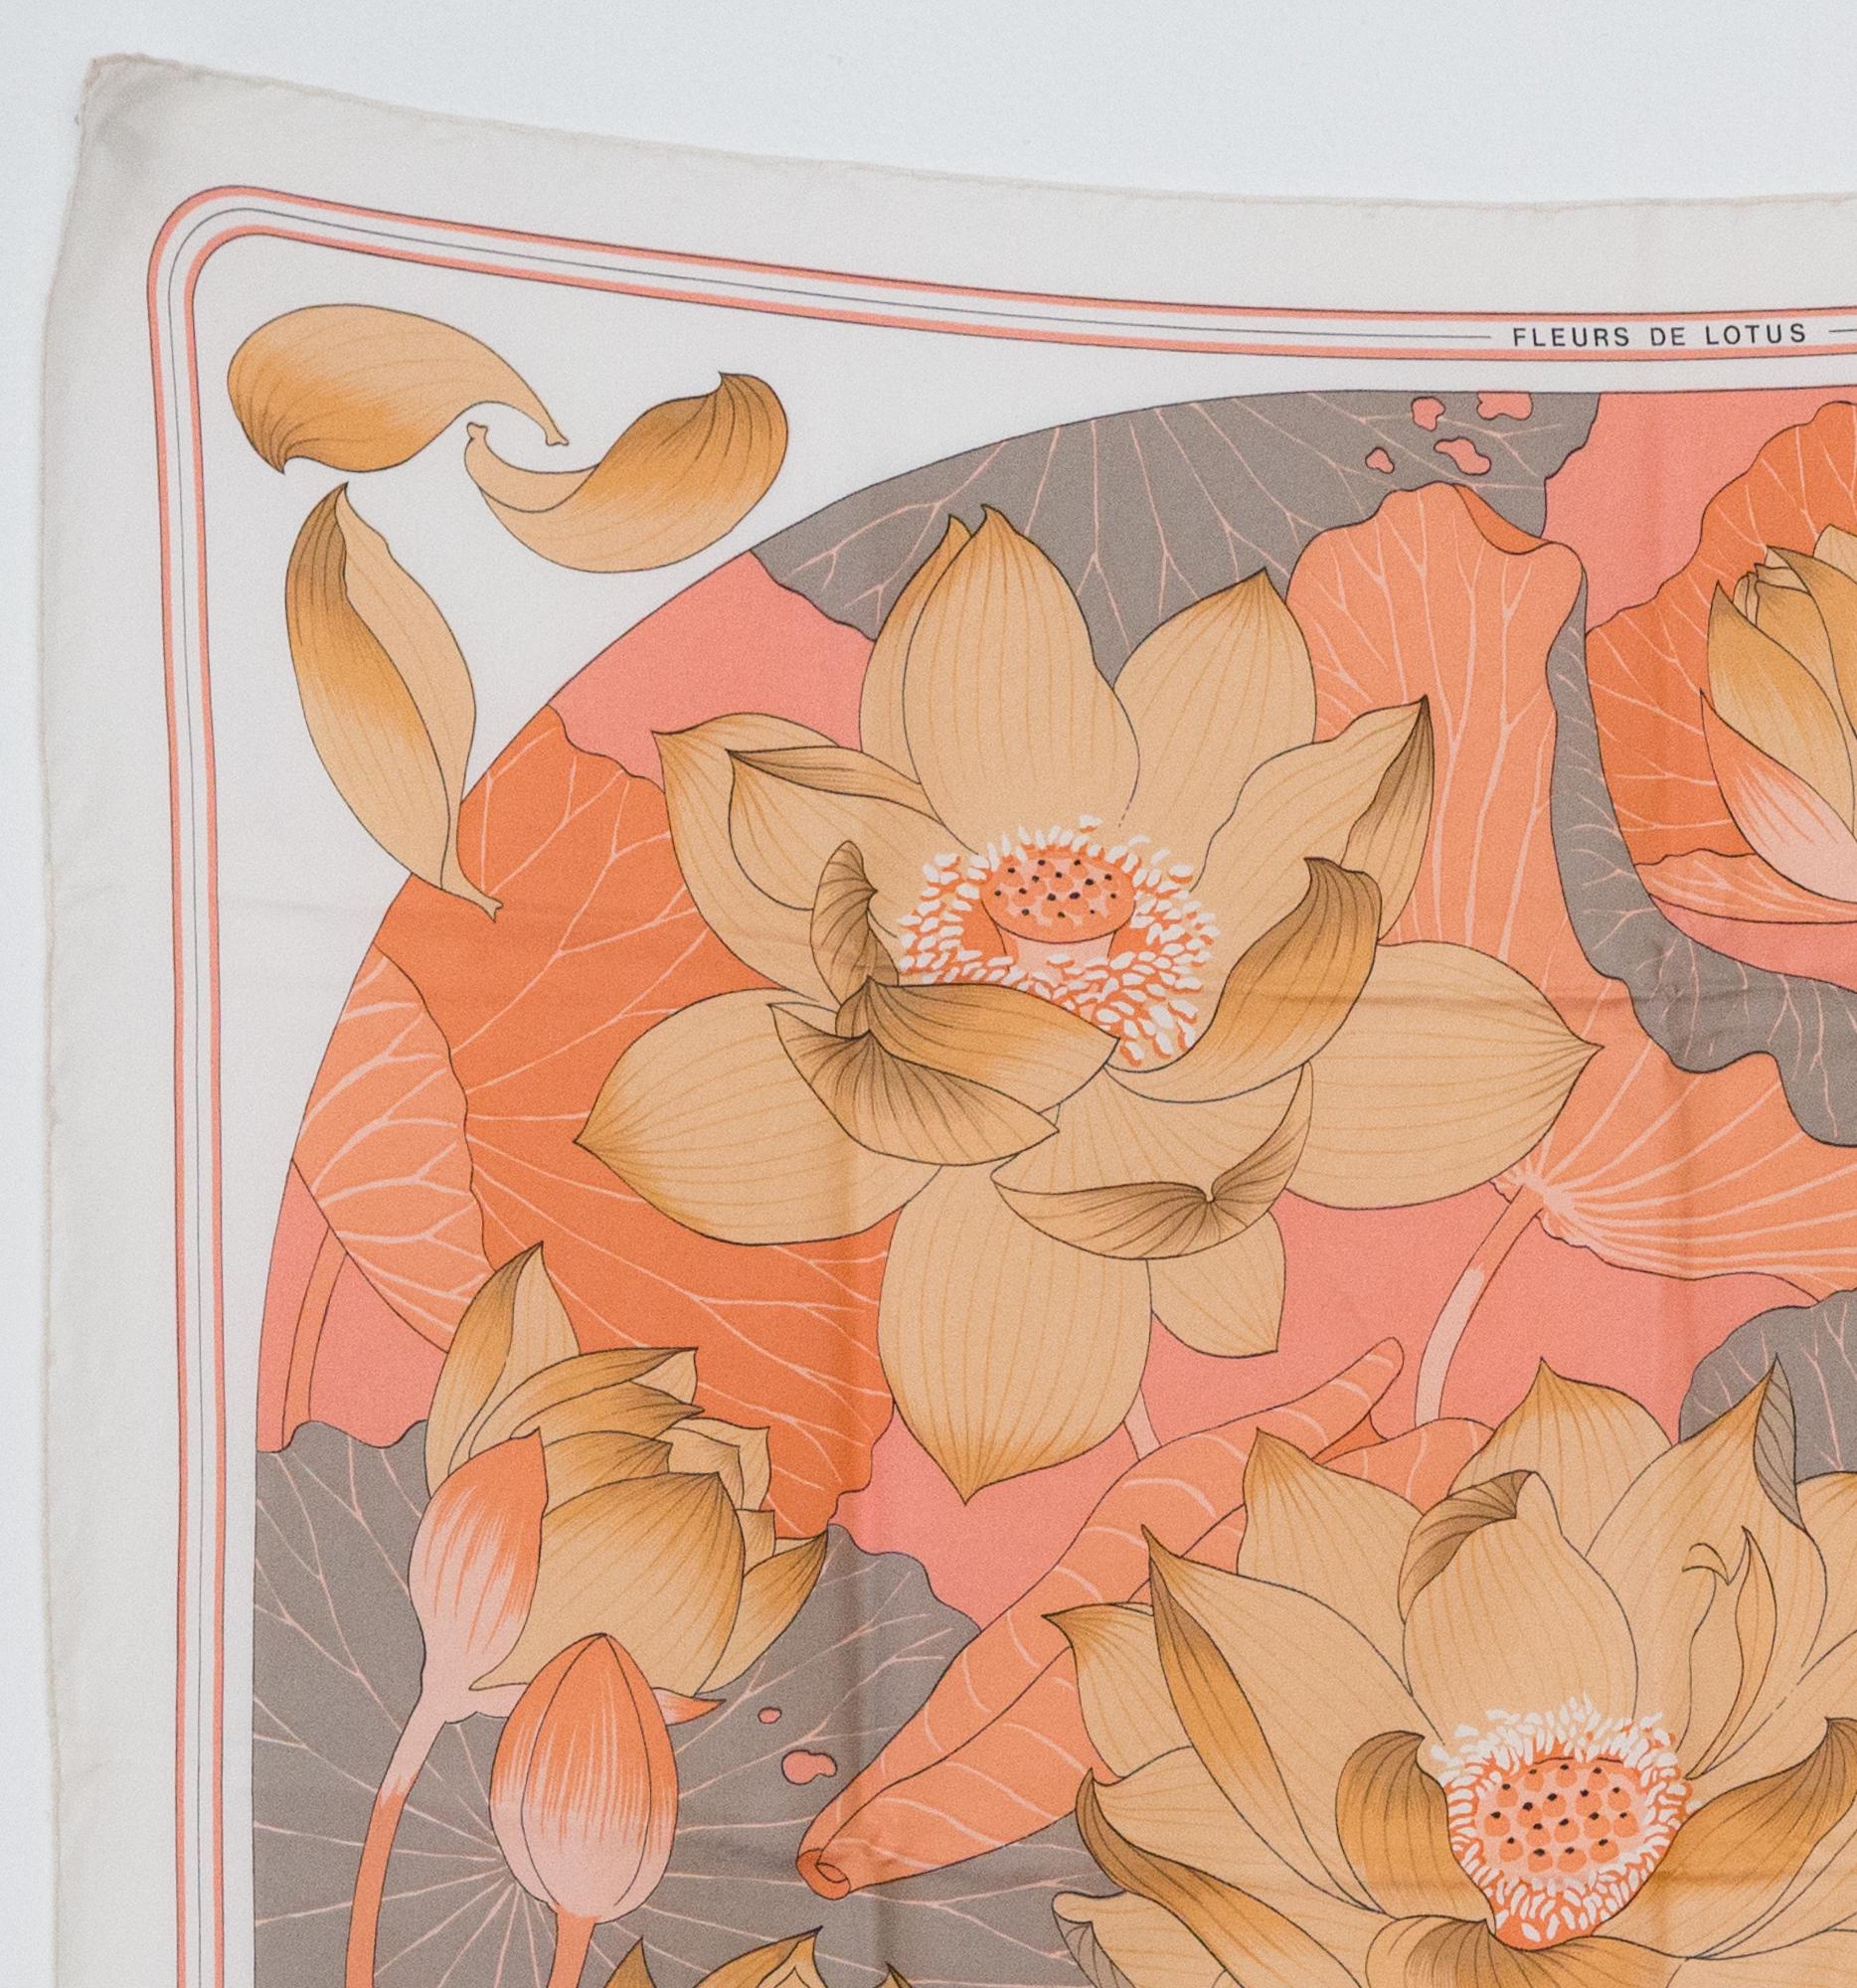 Hermes silk scarf Fleurs de Lotus by Christiane Vauzelle featuring a beige, pink & grey lotus floral scene.
Circa 1976s 
In excellent vintage condition. Made in France.
35,4in. (90cm)  X 35,4in. (90cm)
We guarantee you will receive this  iconic item